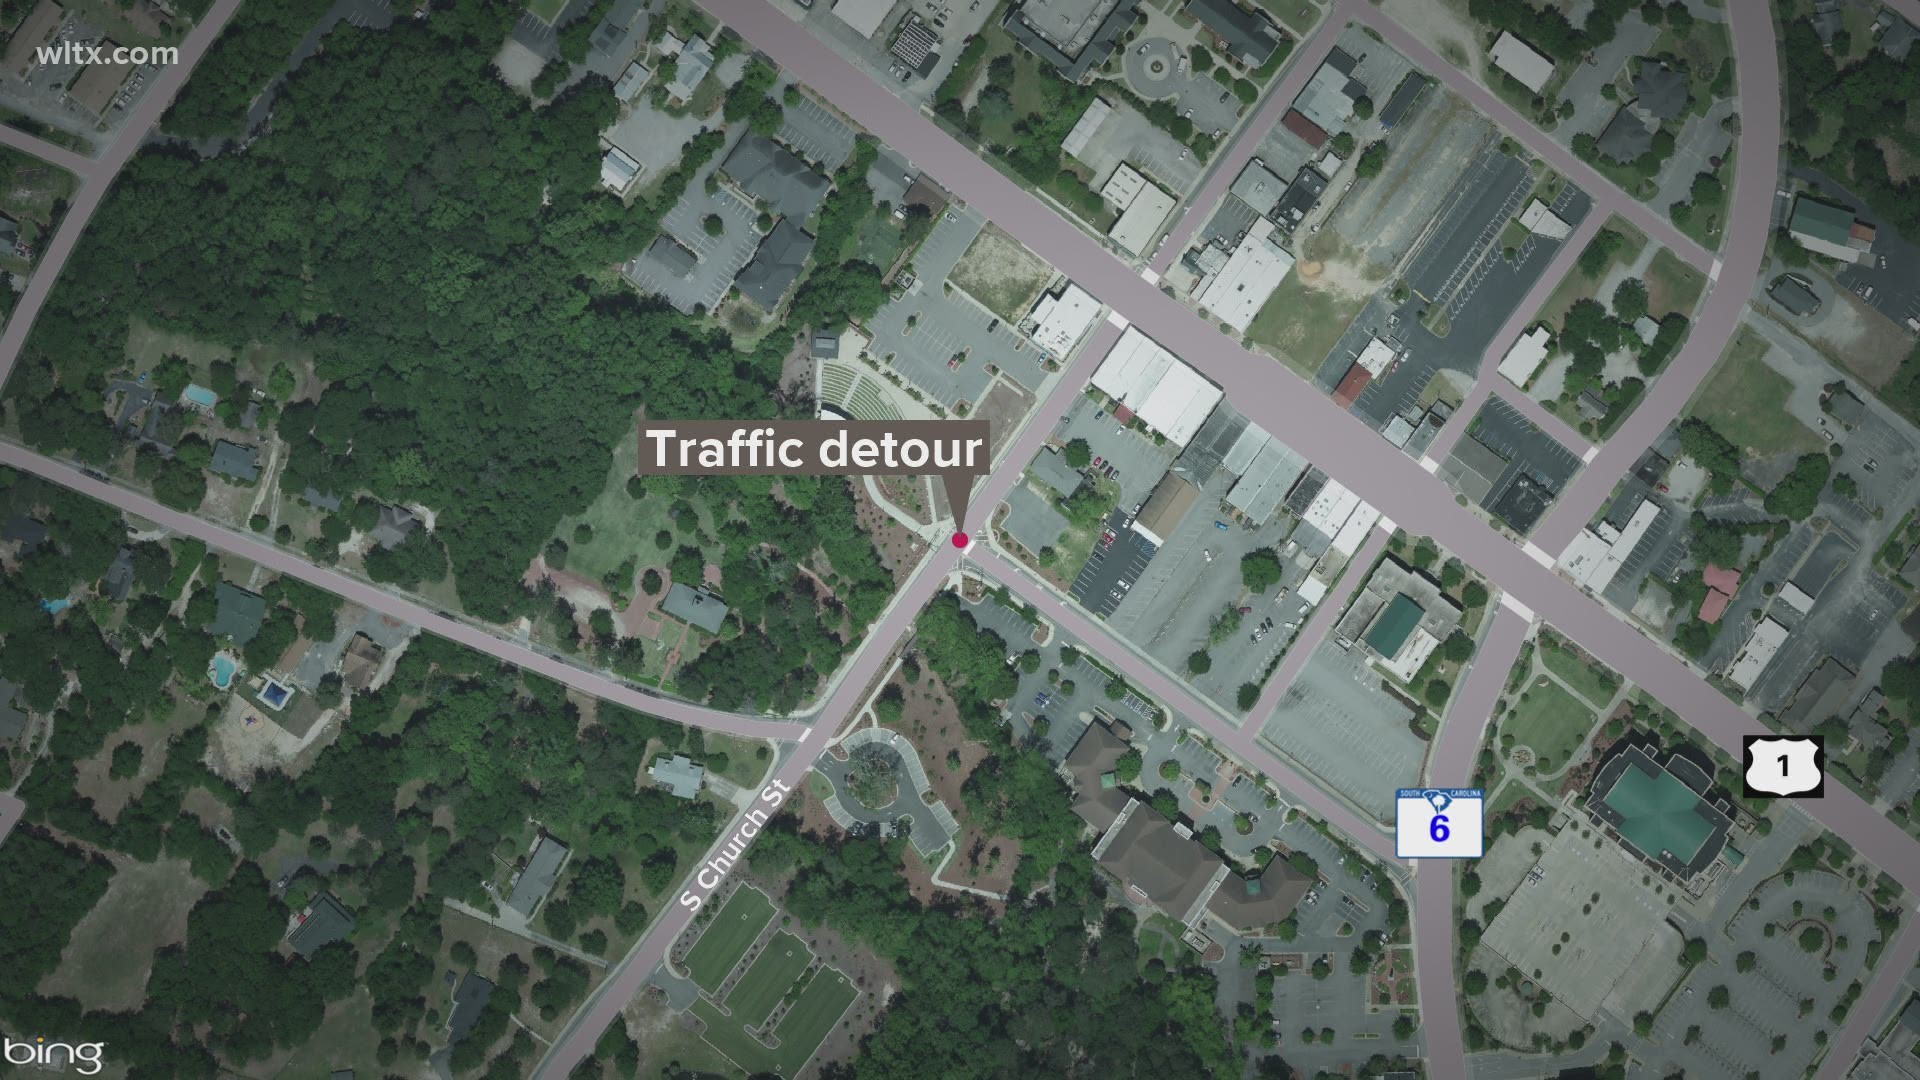 From 9 a.m. to 11 a.m. Thursday, drivers will be unable to turn onto Maiden Lane from S. Church Street.